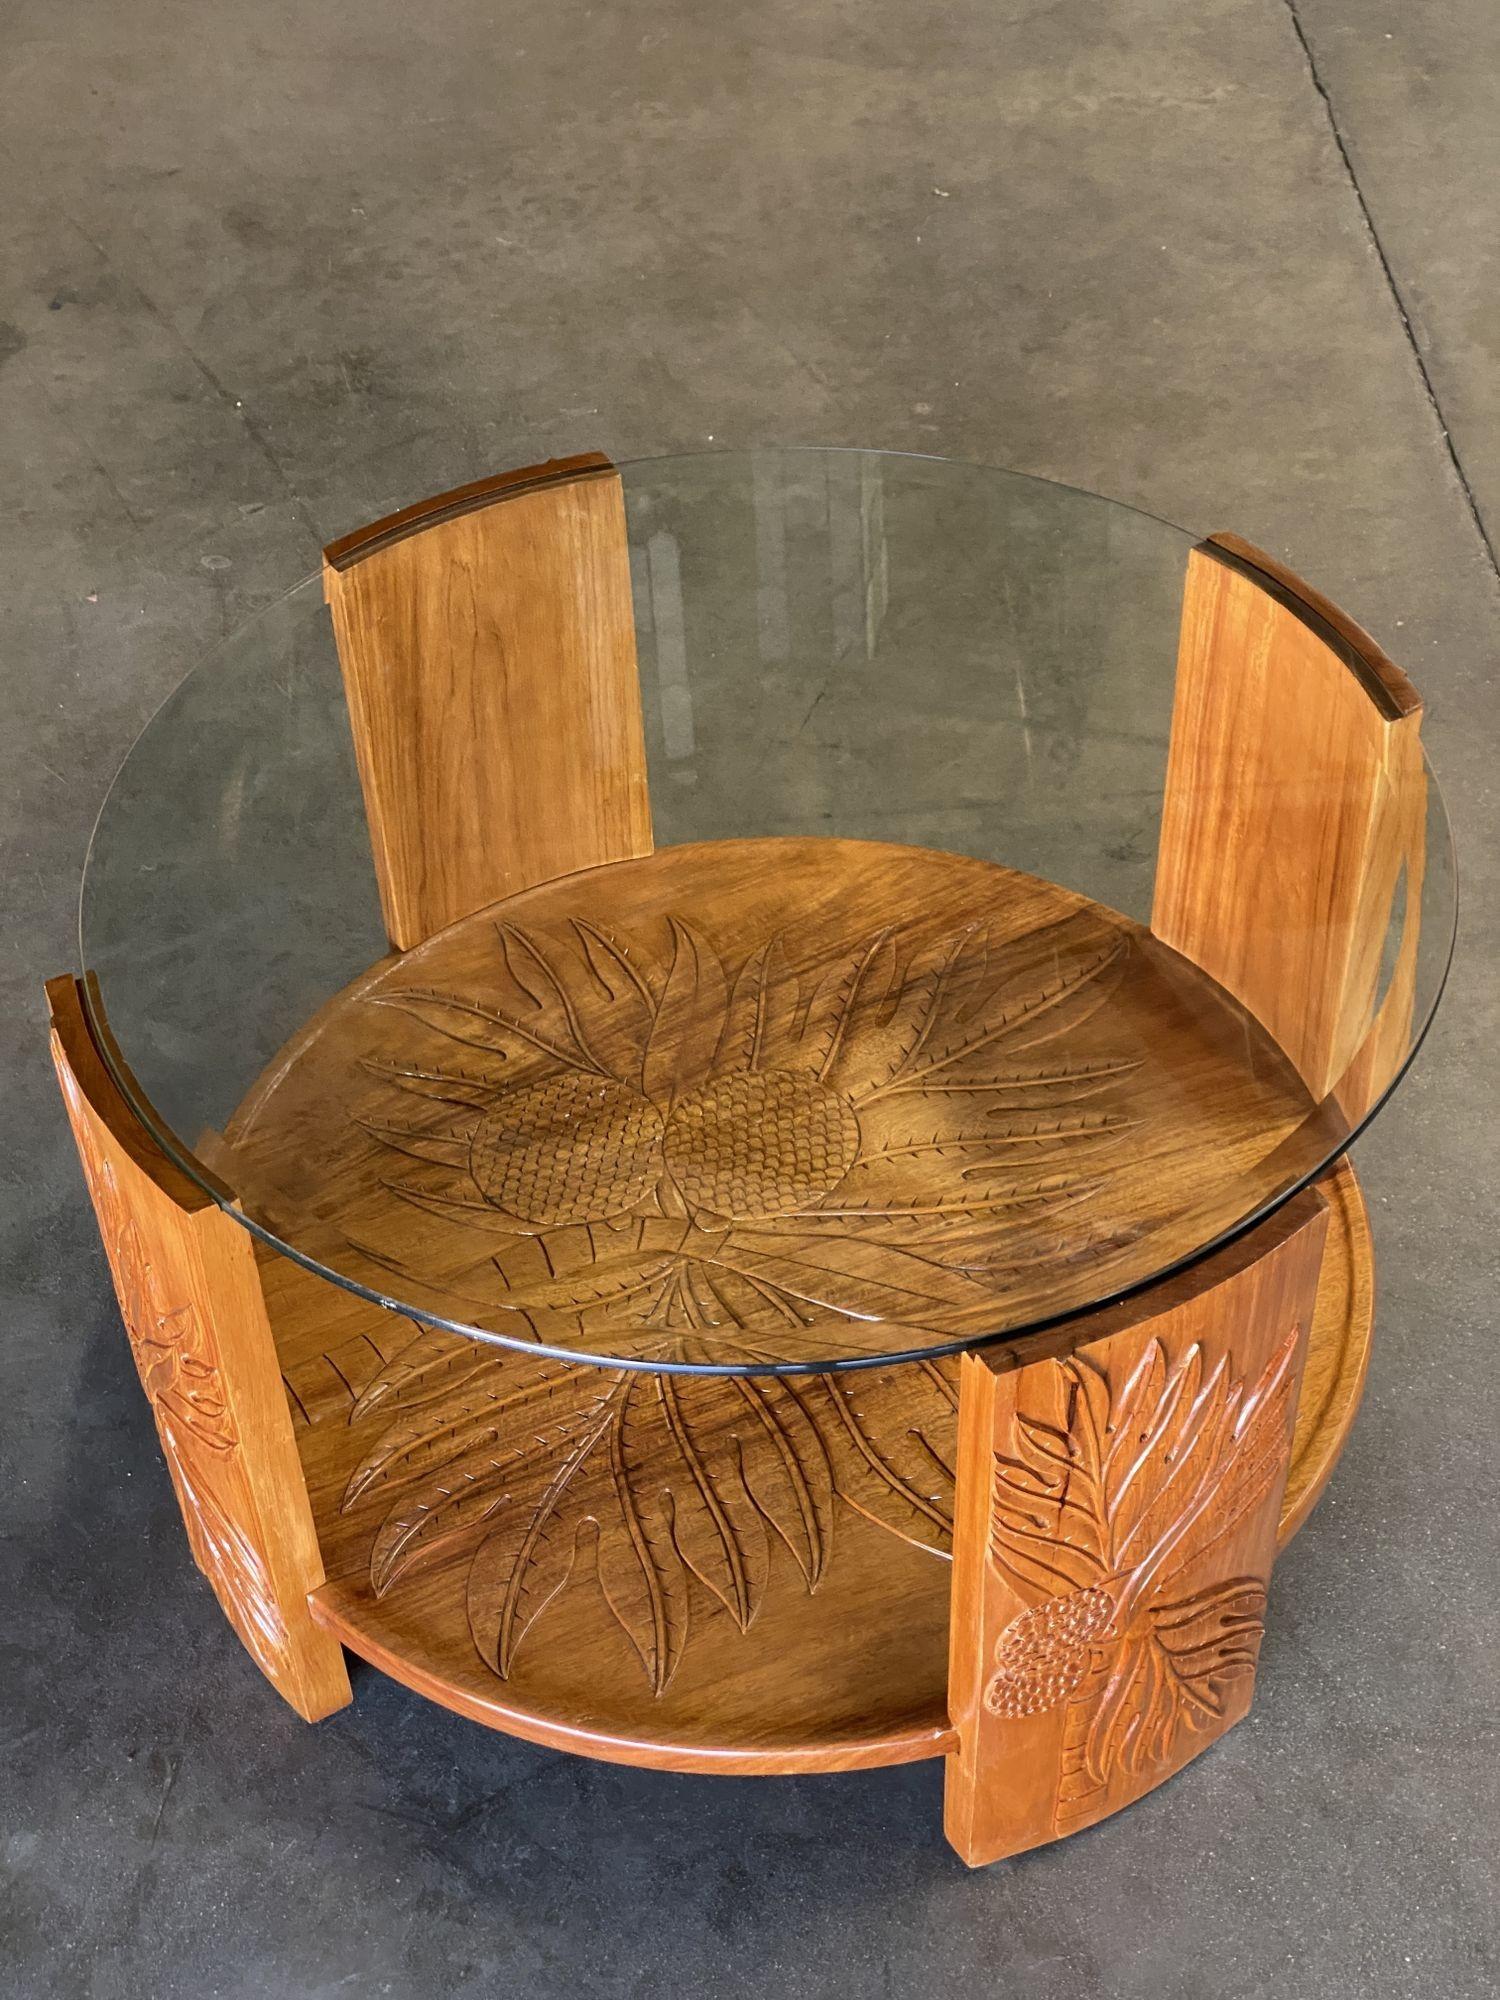 This matching pair of Midcentury three-tier Koa wood side tables with hand-carved bamboo patterns accenting the front. The word “koa” means “warrior” in Hawaiian.
Dimensions: 17